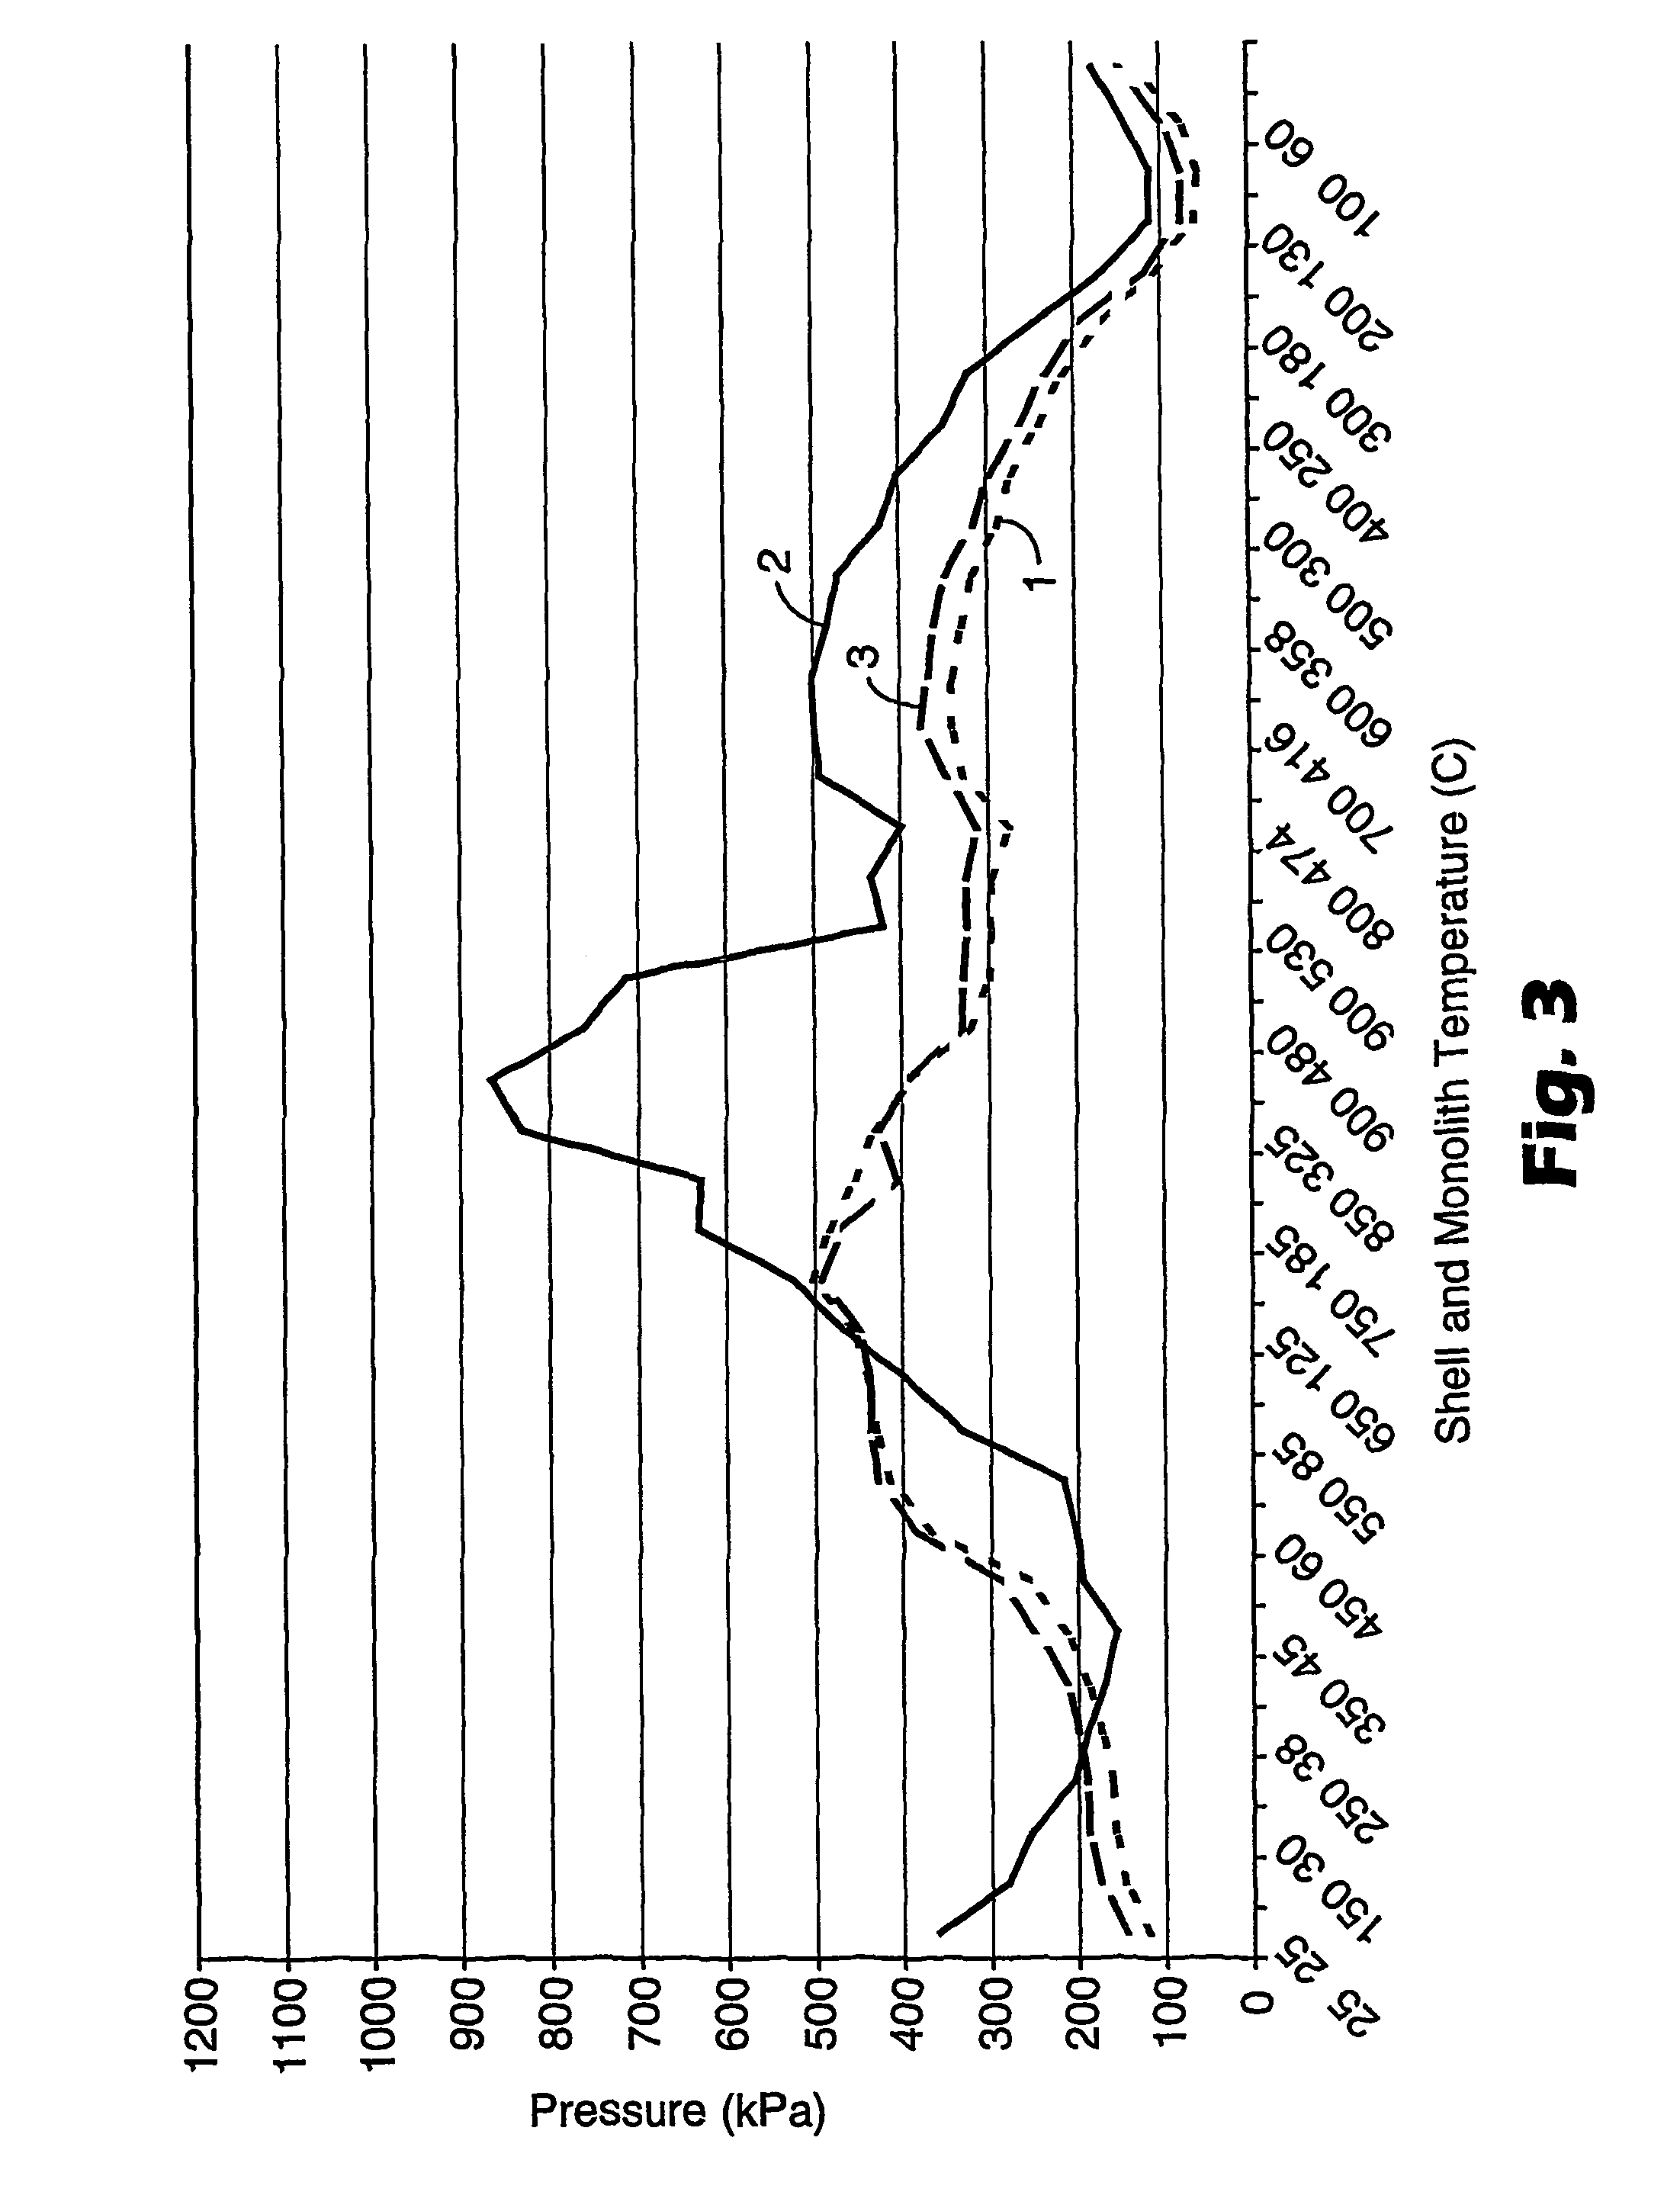 Compositions containing biosoluble inorganic fibers and micaceous binders